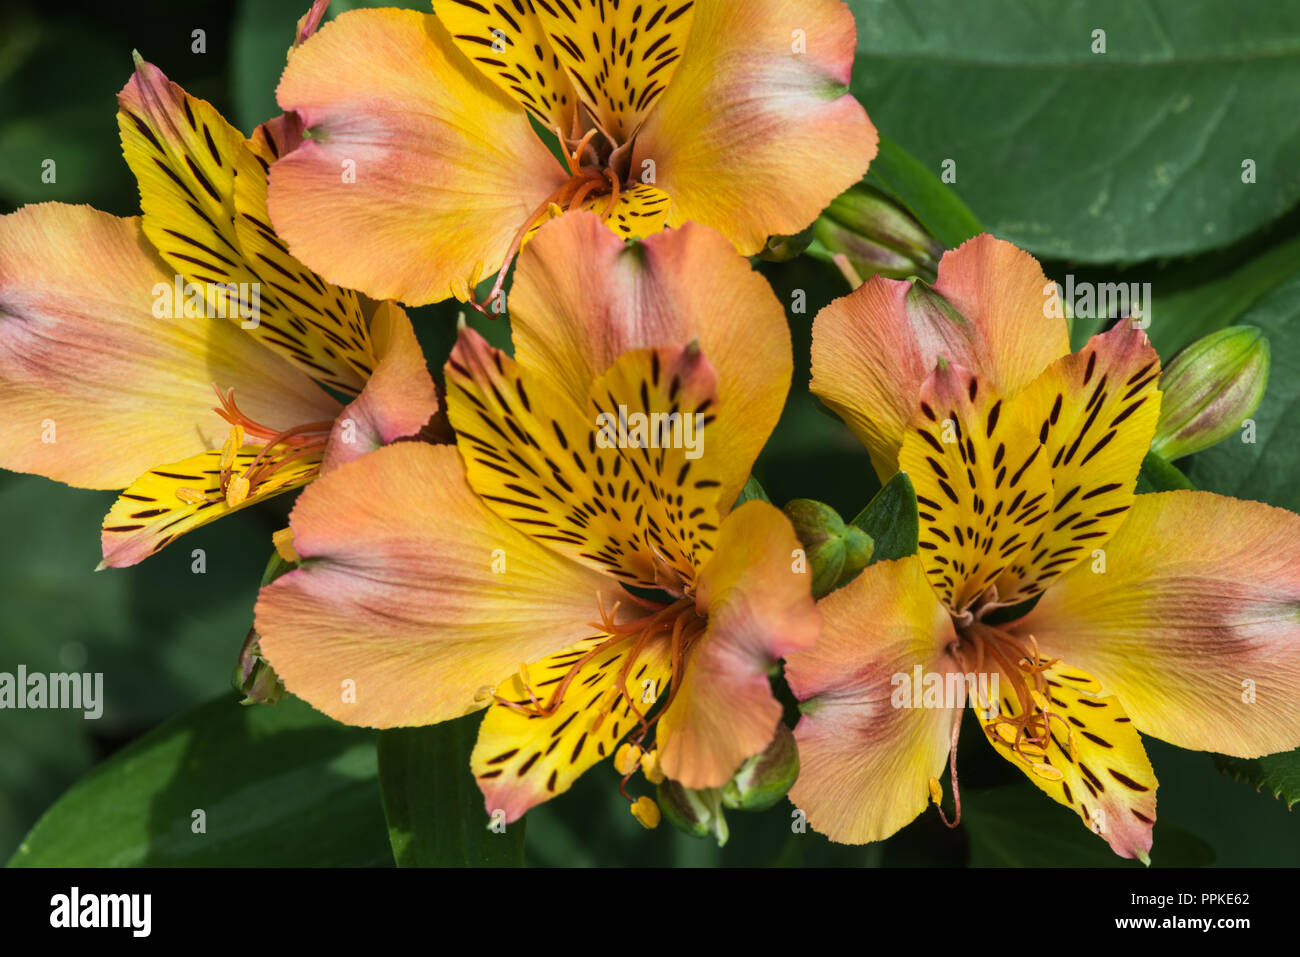 Group of golden, yellow and pink flowers of the tuberous perennial, Alstroemeria or Peruvian Lily in Lancashire, England, UK in the summer garden. Stock Photo